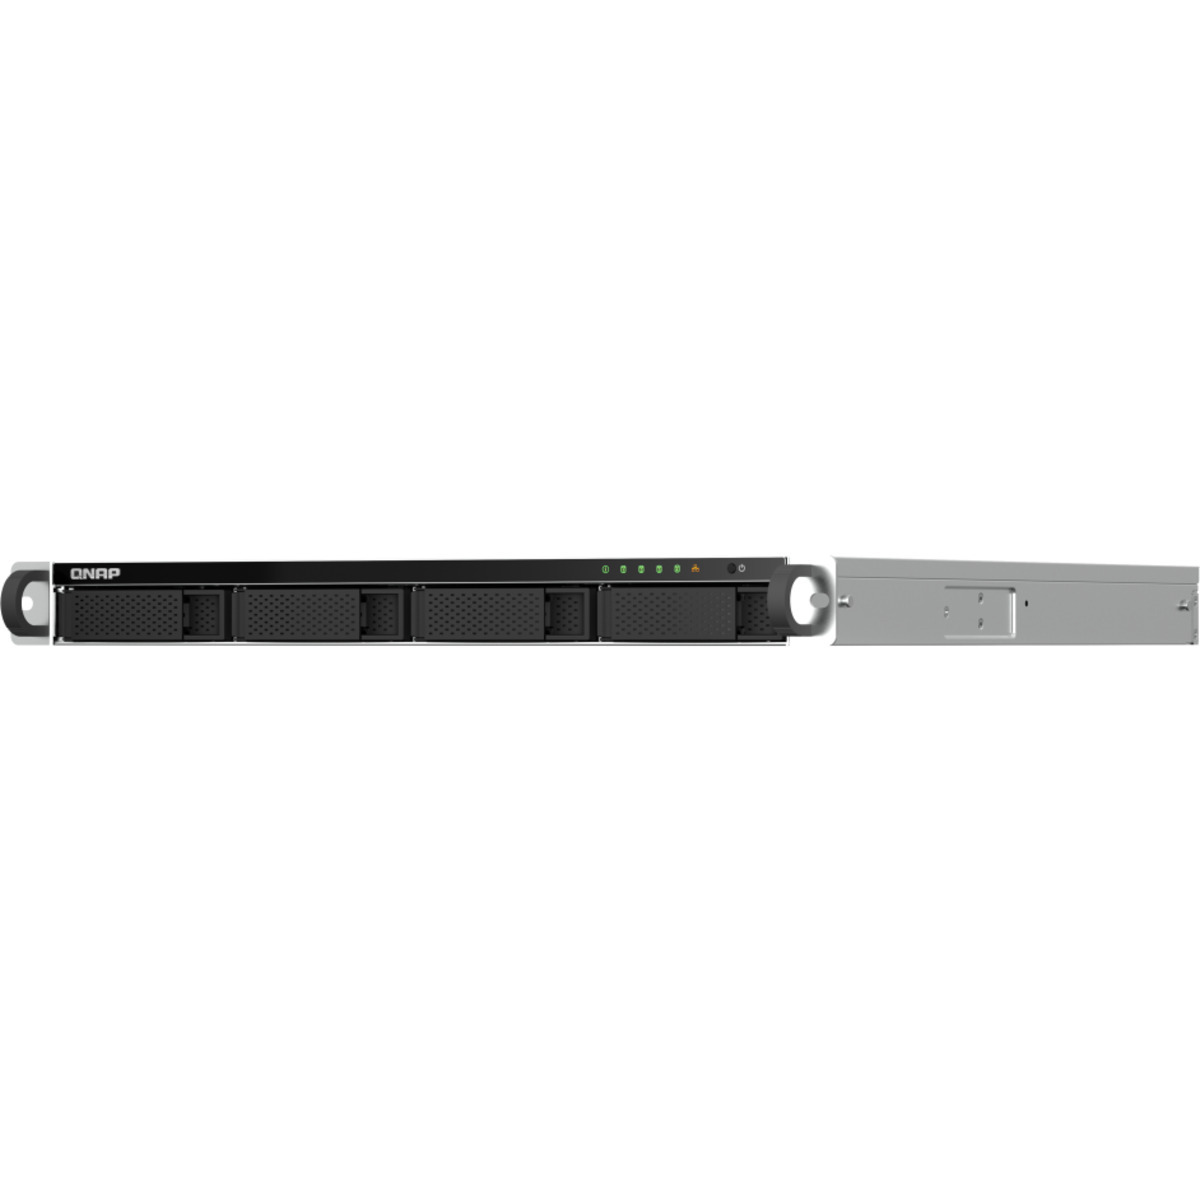 QNAP TS-464U-RP 28tb 4-Bay RackMount Multimedia / Power User / Business NAS - Network Attached Storage Device 2x14tb Seagate EXOS X18 ST14000NM000J 3.5 7200rpm SATA 6Gb/s HDD ENTERPRISE Class Drives Installed - Burn-In Tested TS-464U-RP